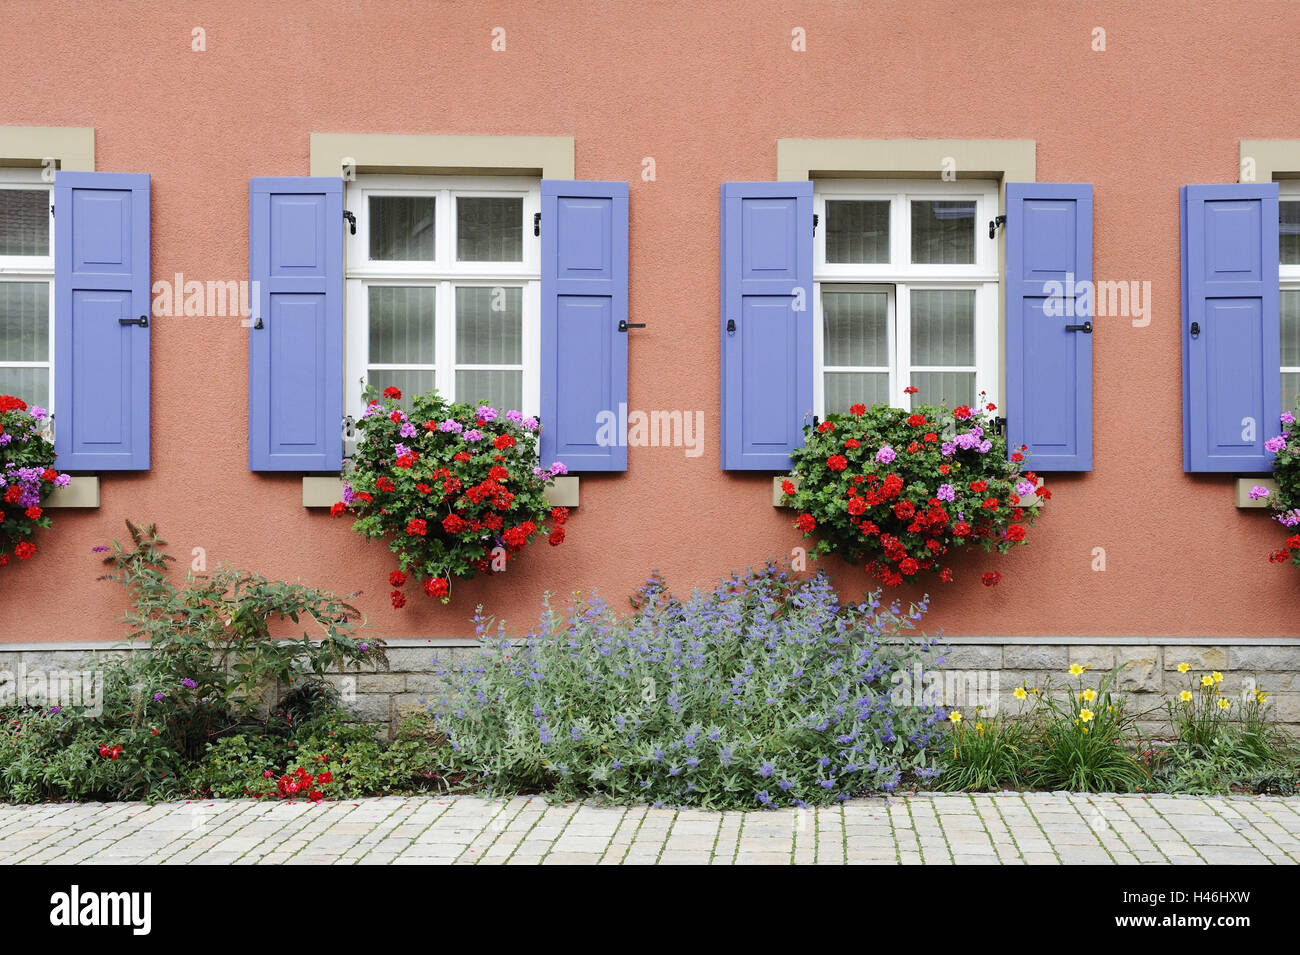 Germany, Bavaria, Sommerach (village), residential house, floral decoration, outside, Lower Franconia, house, exterior wall, house facade, facade, window, Hängegeranien, red, mauve, balcony flowers, floral decoration, window cross, shutters, blue, sidewal Stock Photo